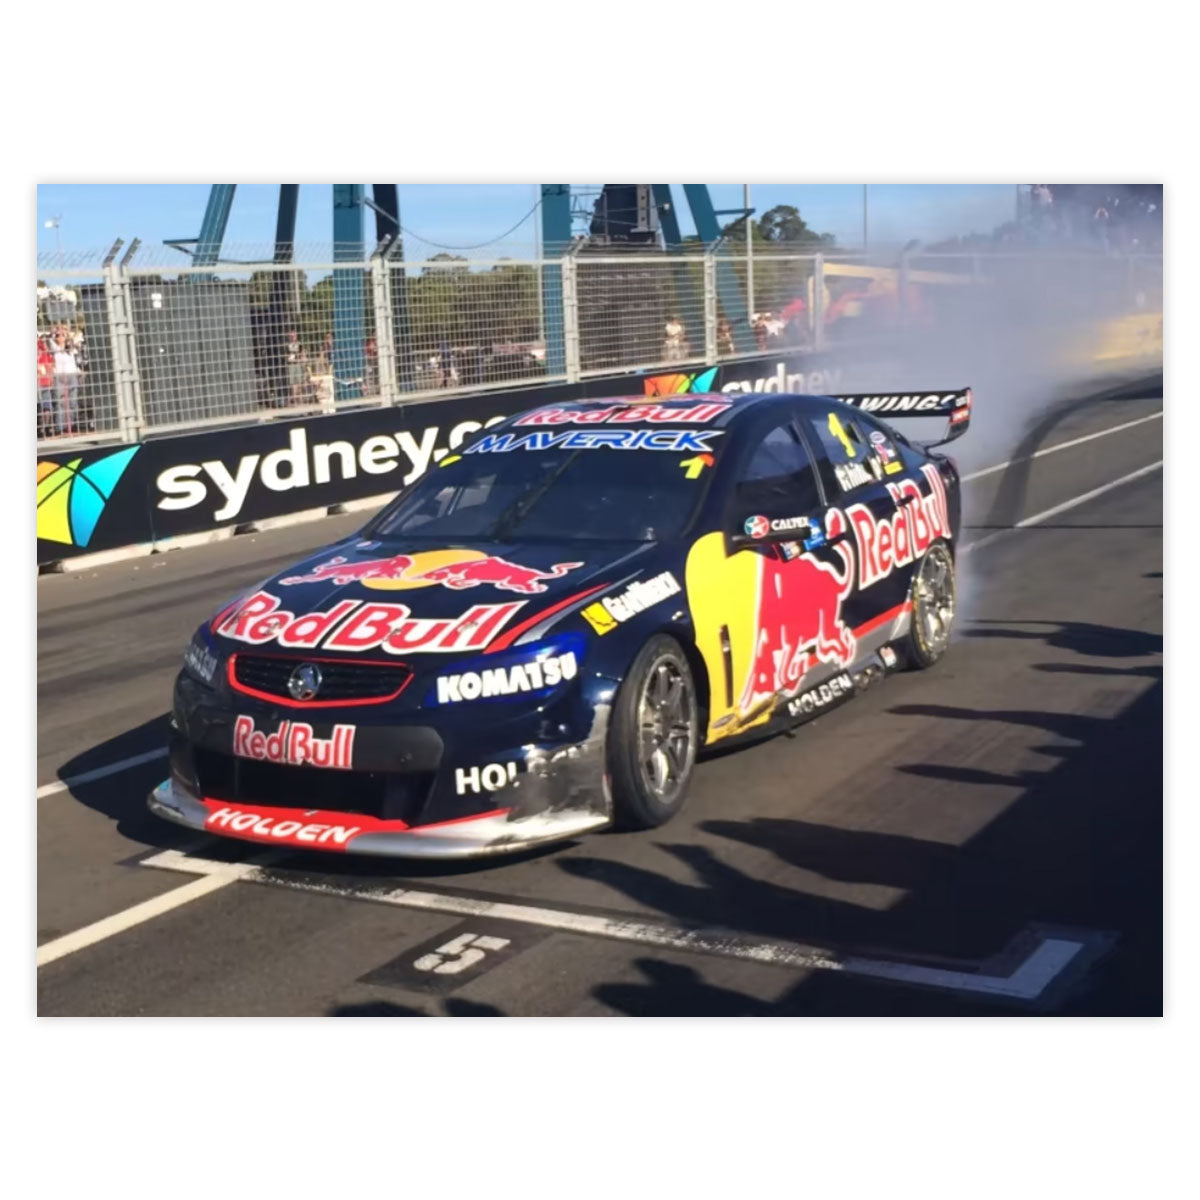 Holden VF Commodore - Red Bull Holden Racing #1 - Whincup - 2013 Championship Winner - Sydney Nrma Motoring & Services 500